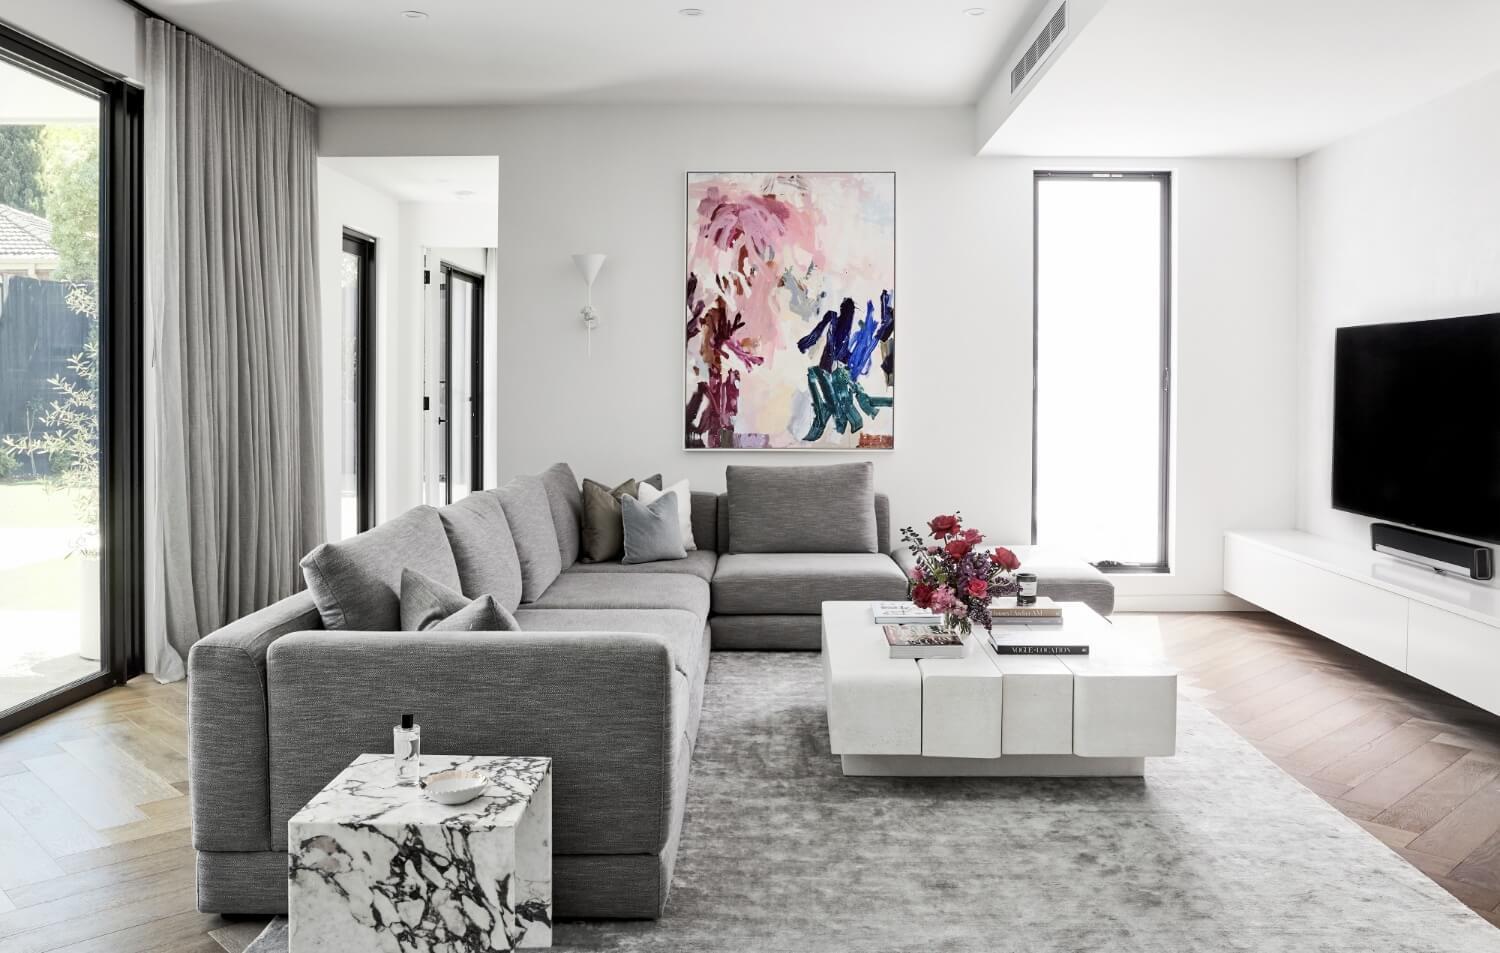 Artwork Adds A Pop Of Colour To Muted Furniture And Materials In Living Room